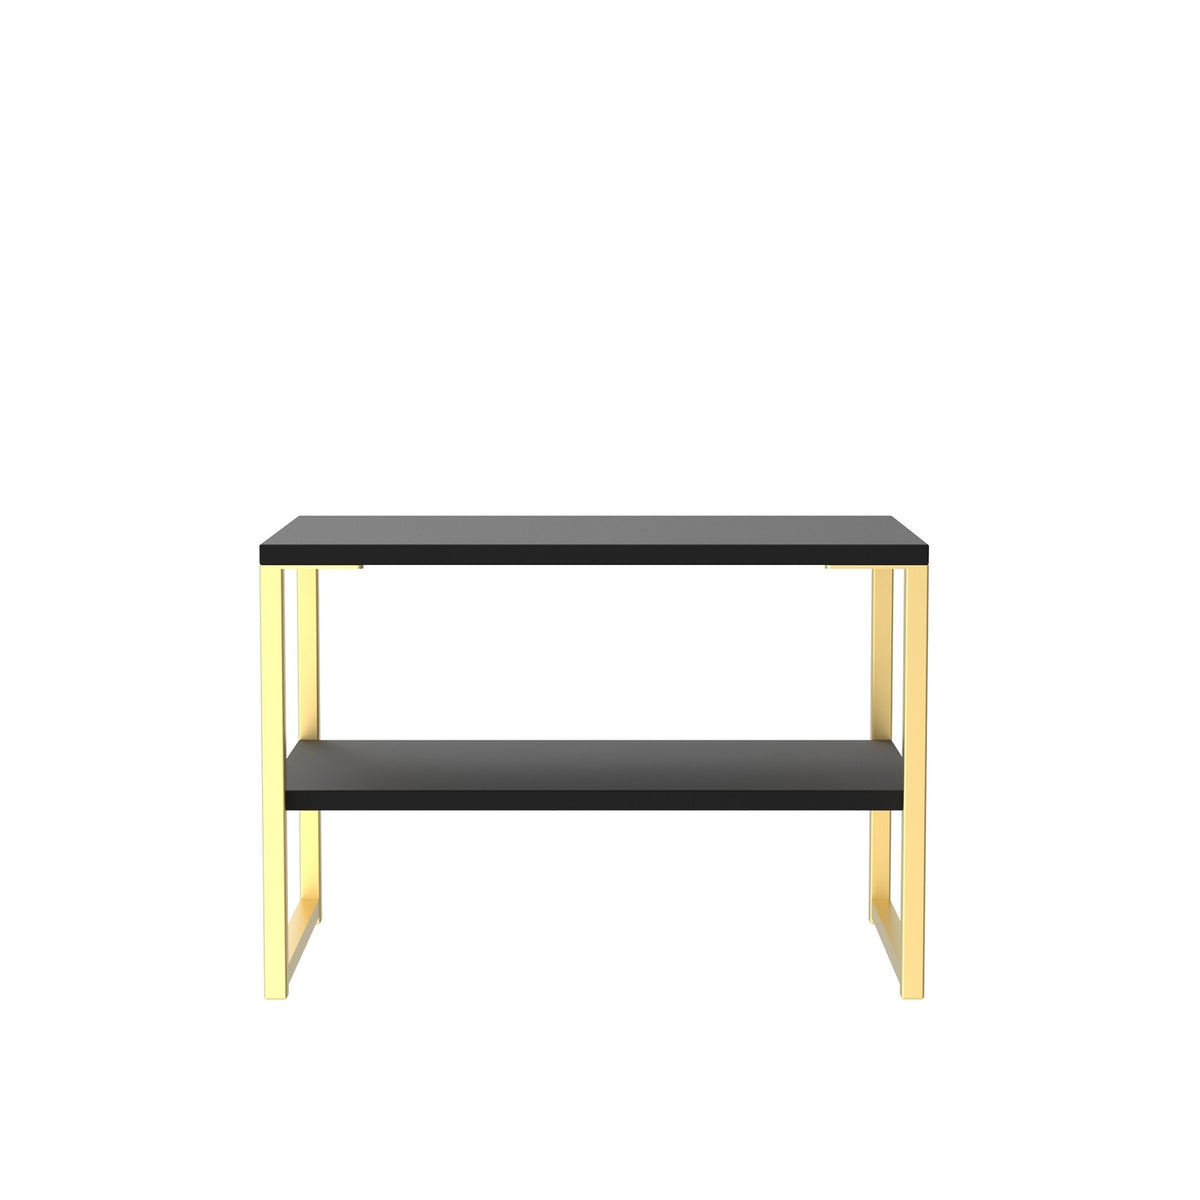 Hudson Black Sofa Side Lamp Table with shelf and gold legs from Roseland